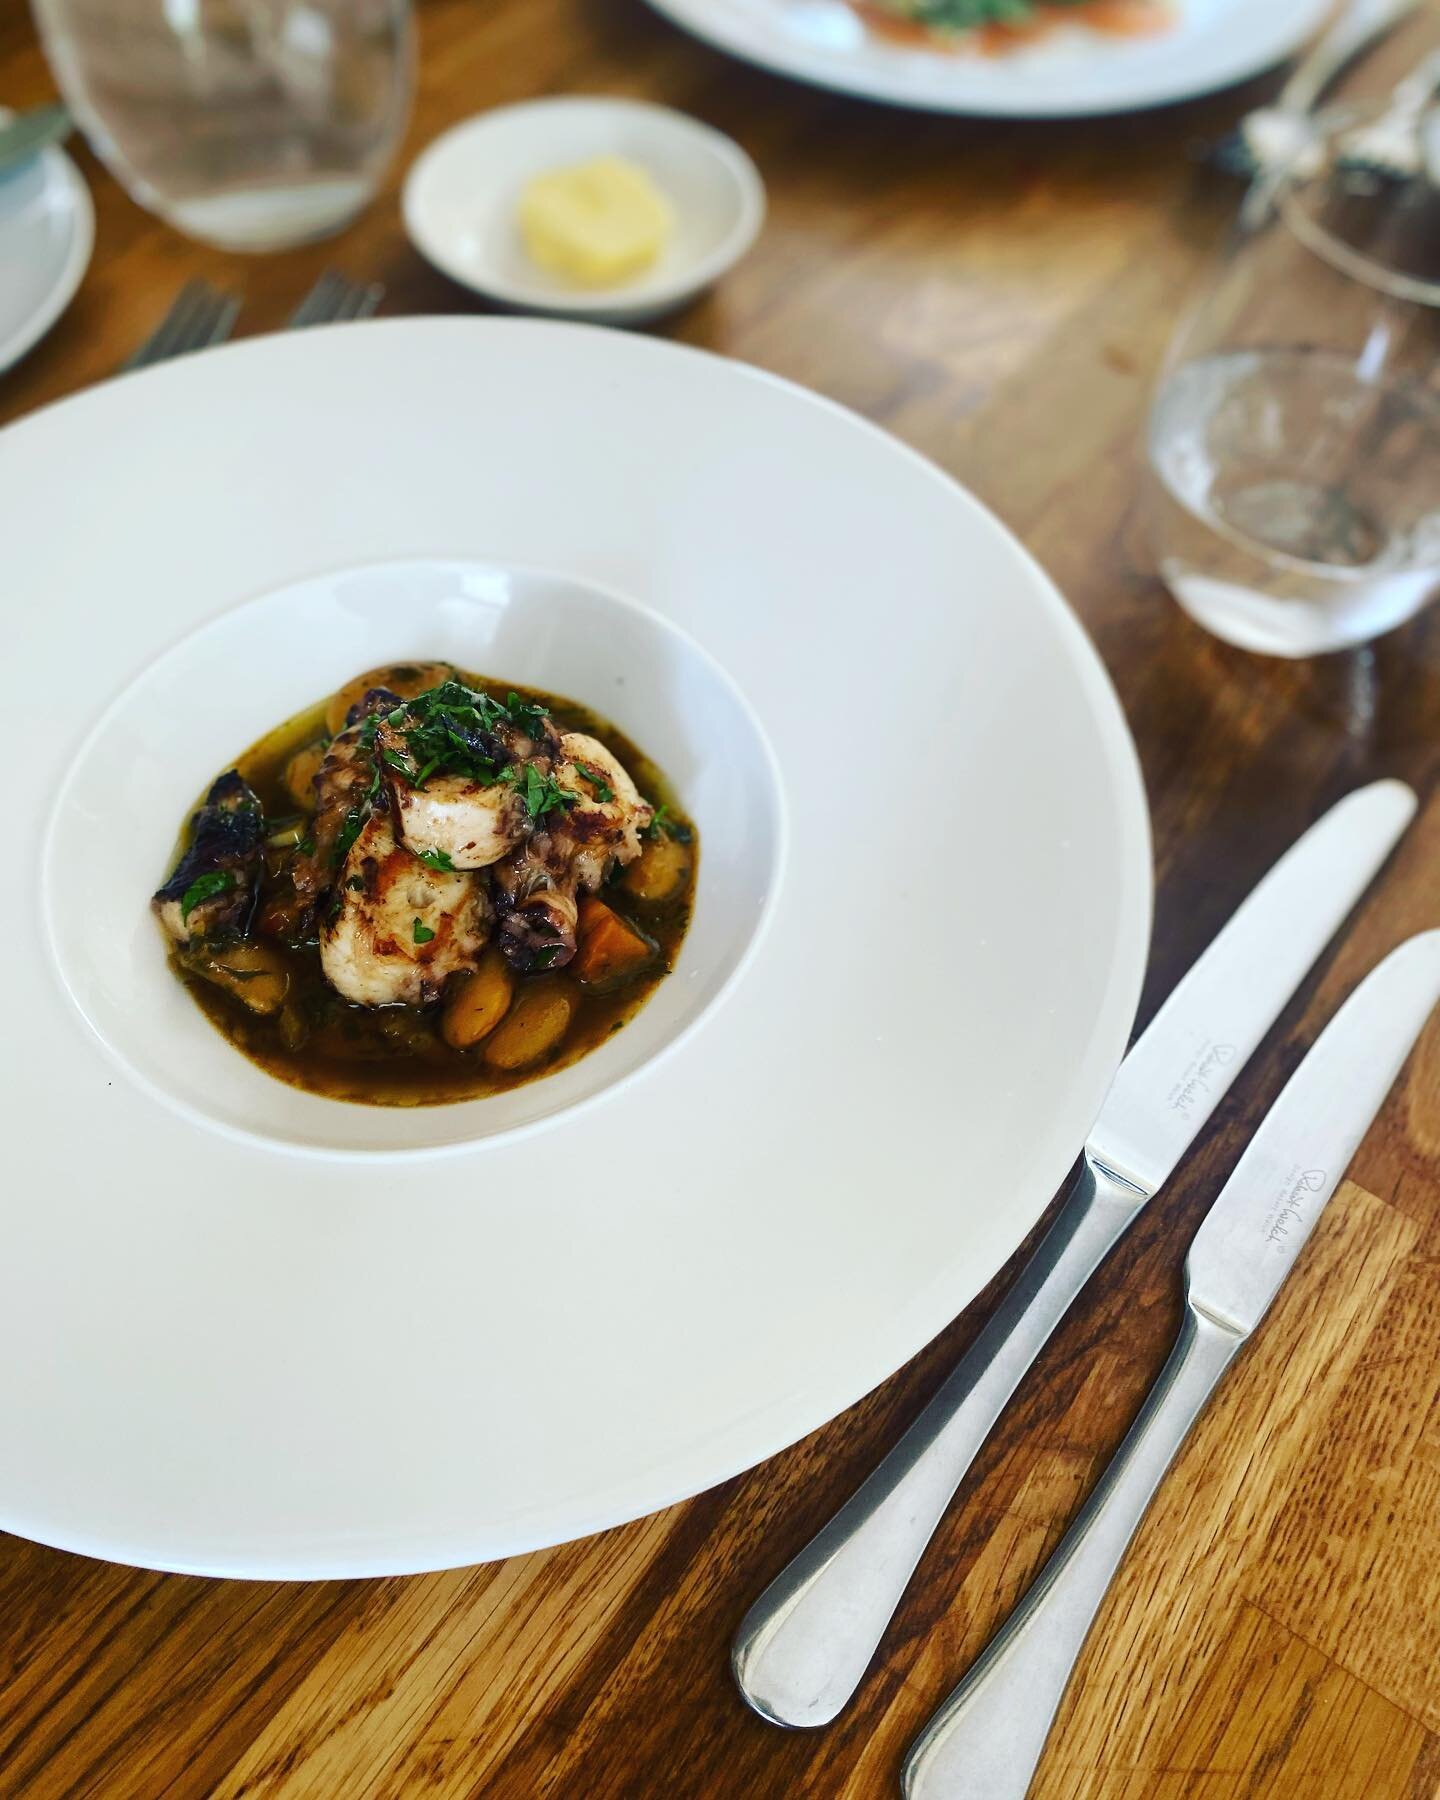 Char Grilled Octopus &lsquo;Spanish Style&rsquo; Butterbeans, Lemon, Olive Oil &amp; Flat Parsley 🐙 Sunday Lunch Menu, Set 3 Course Lunch &pound;28pp - changes weekly, sample menus on our website to view 
.
#restaurant #service #lunch #chef #smallbu